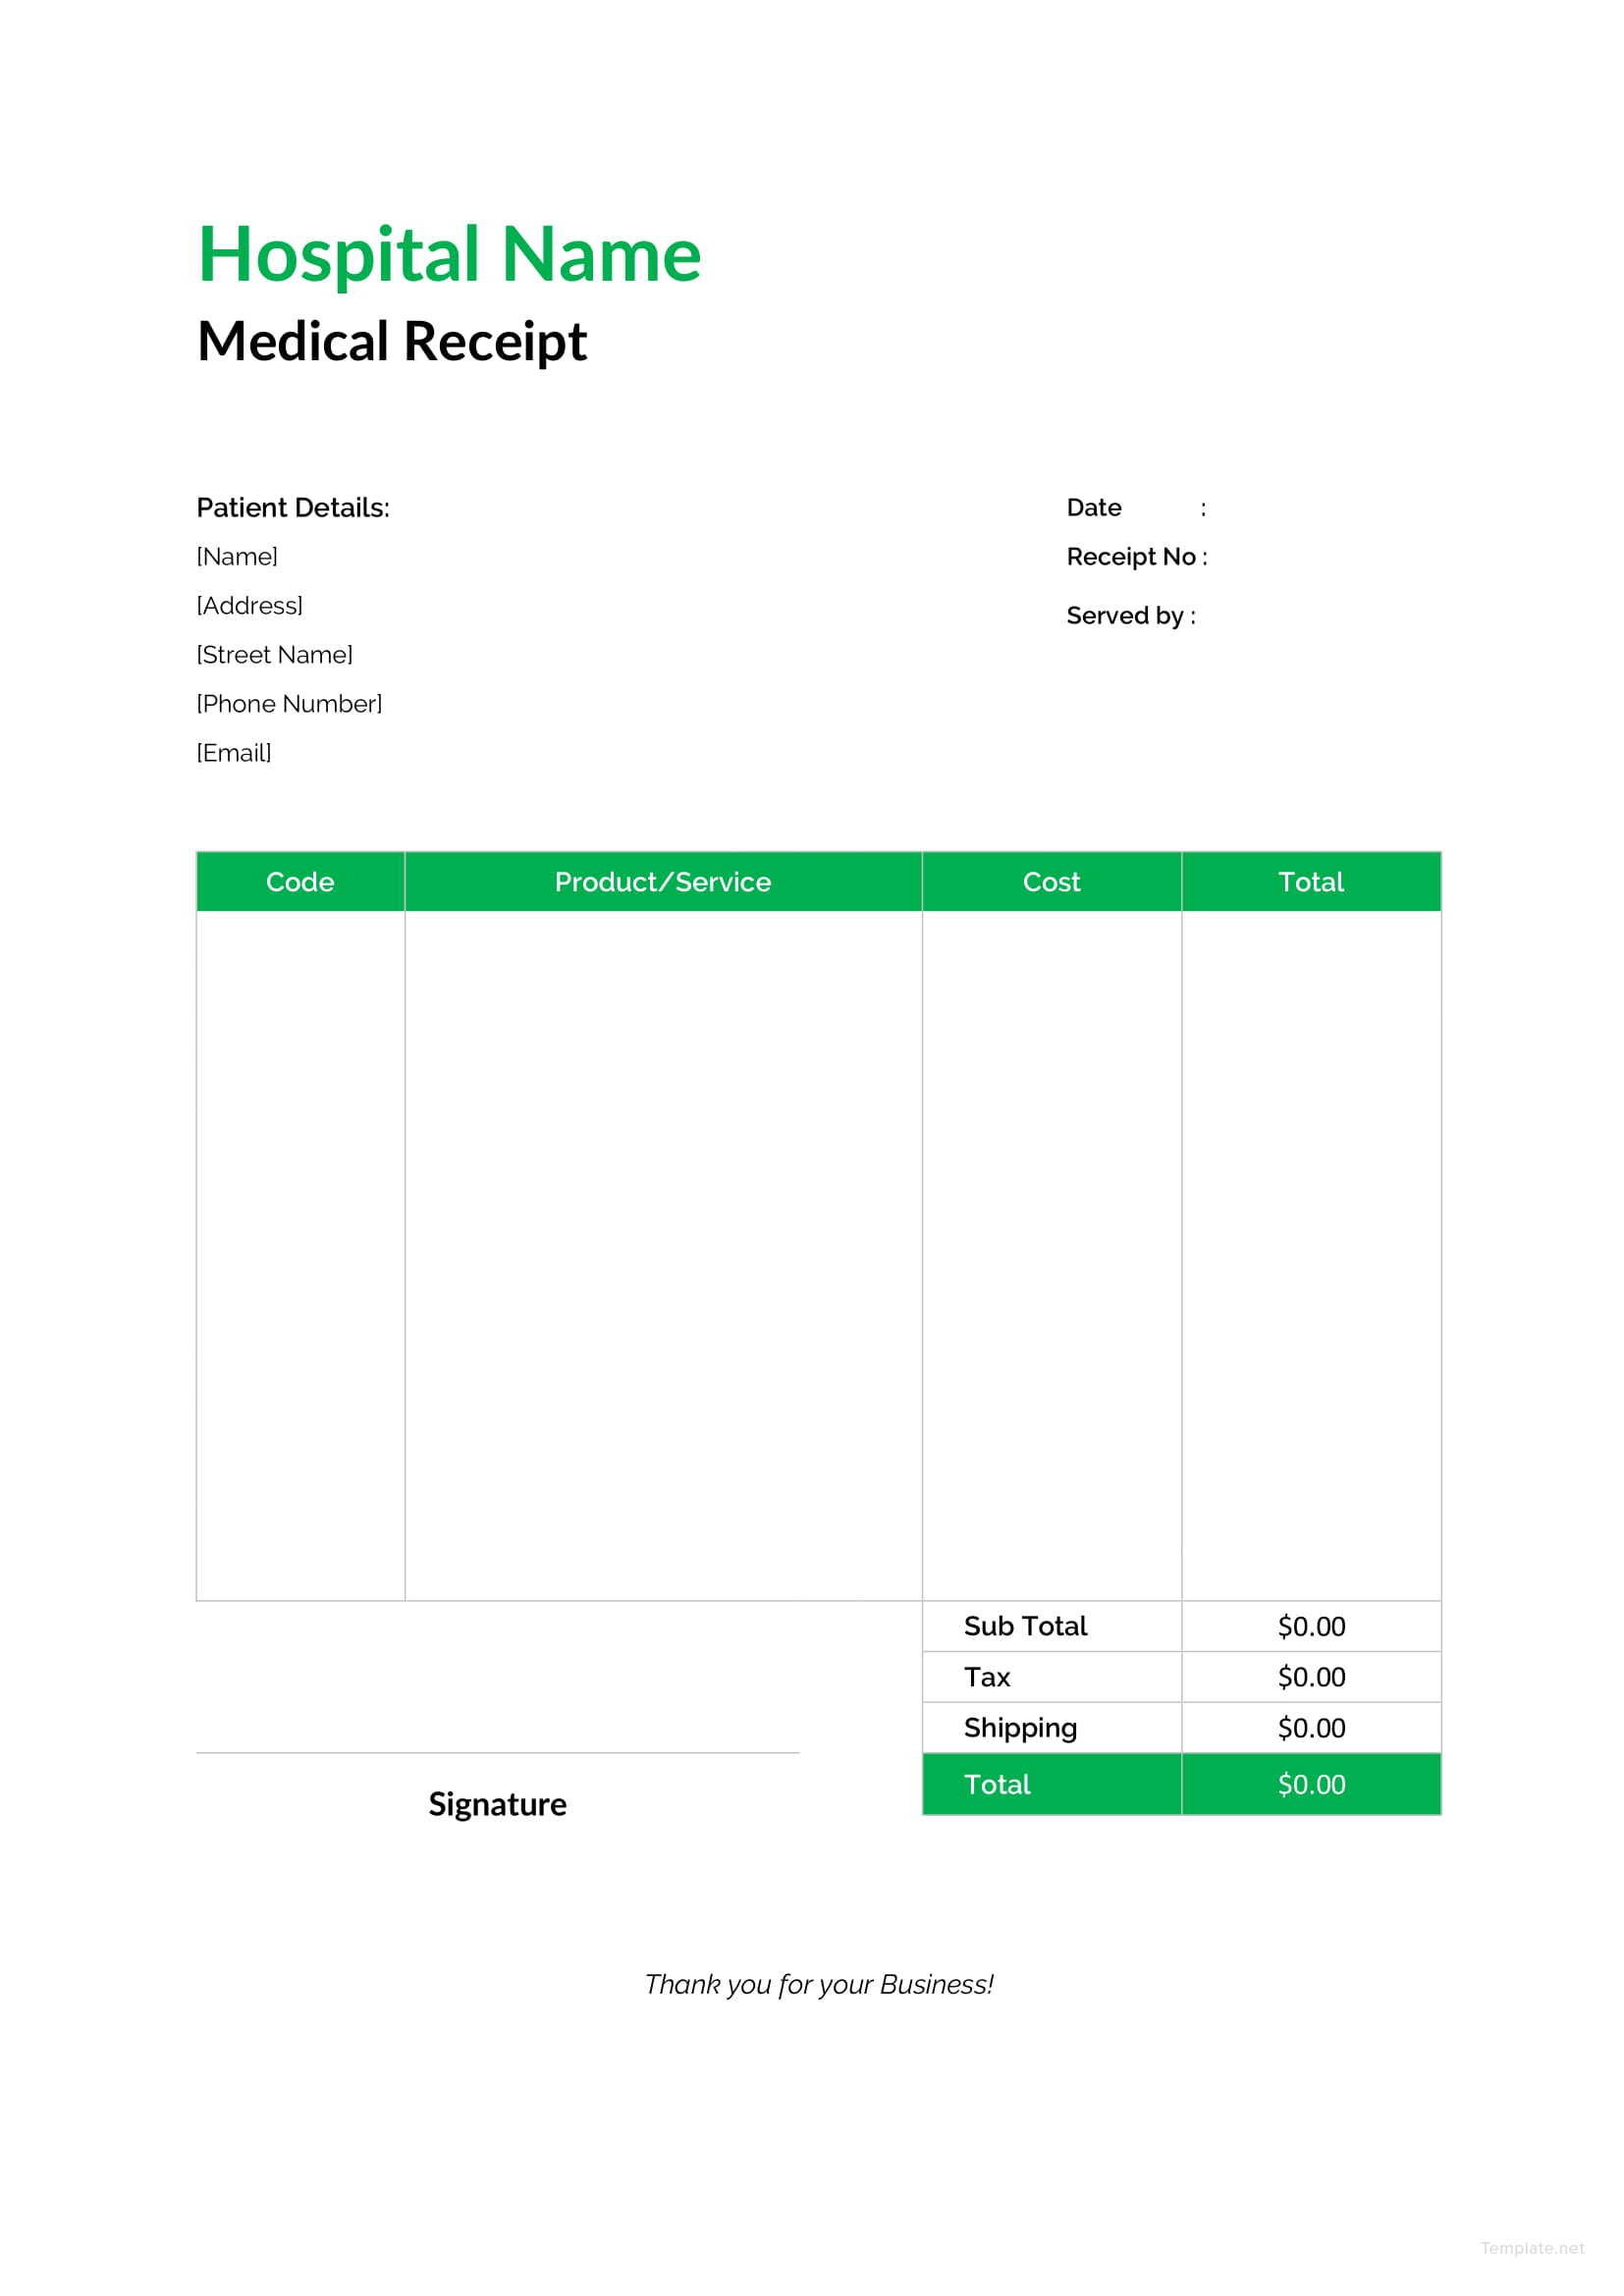 Medical Receipt Template in Microsoft Word Excel Template net